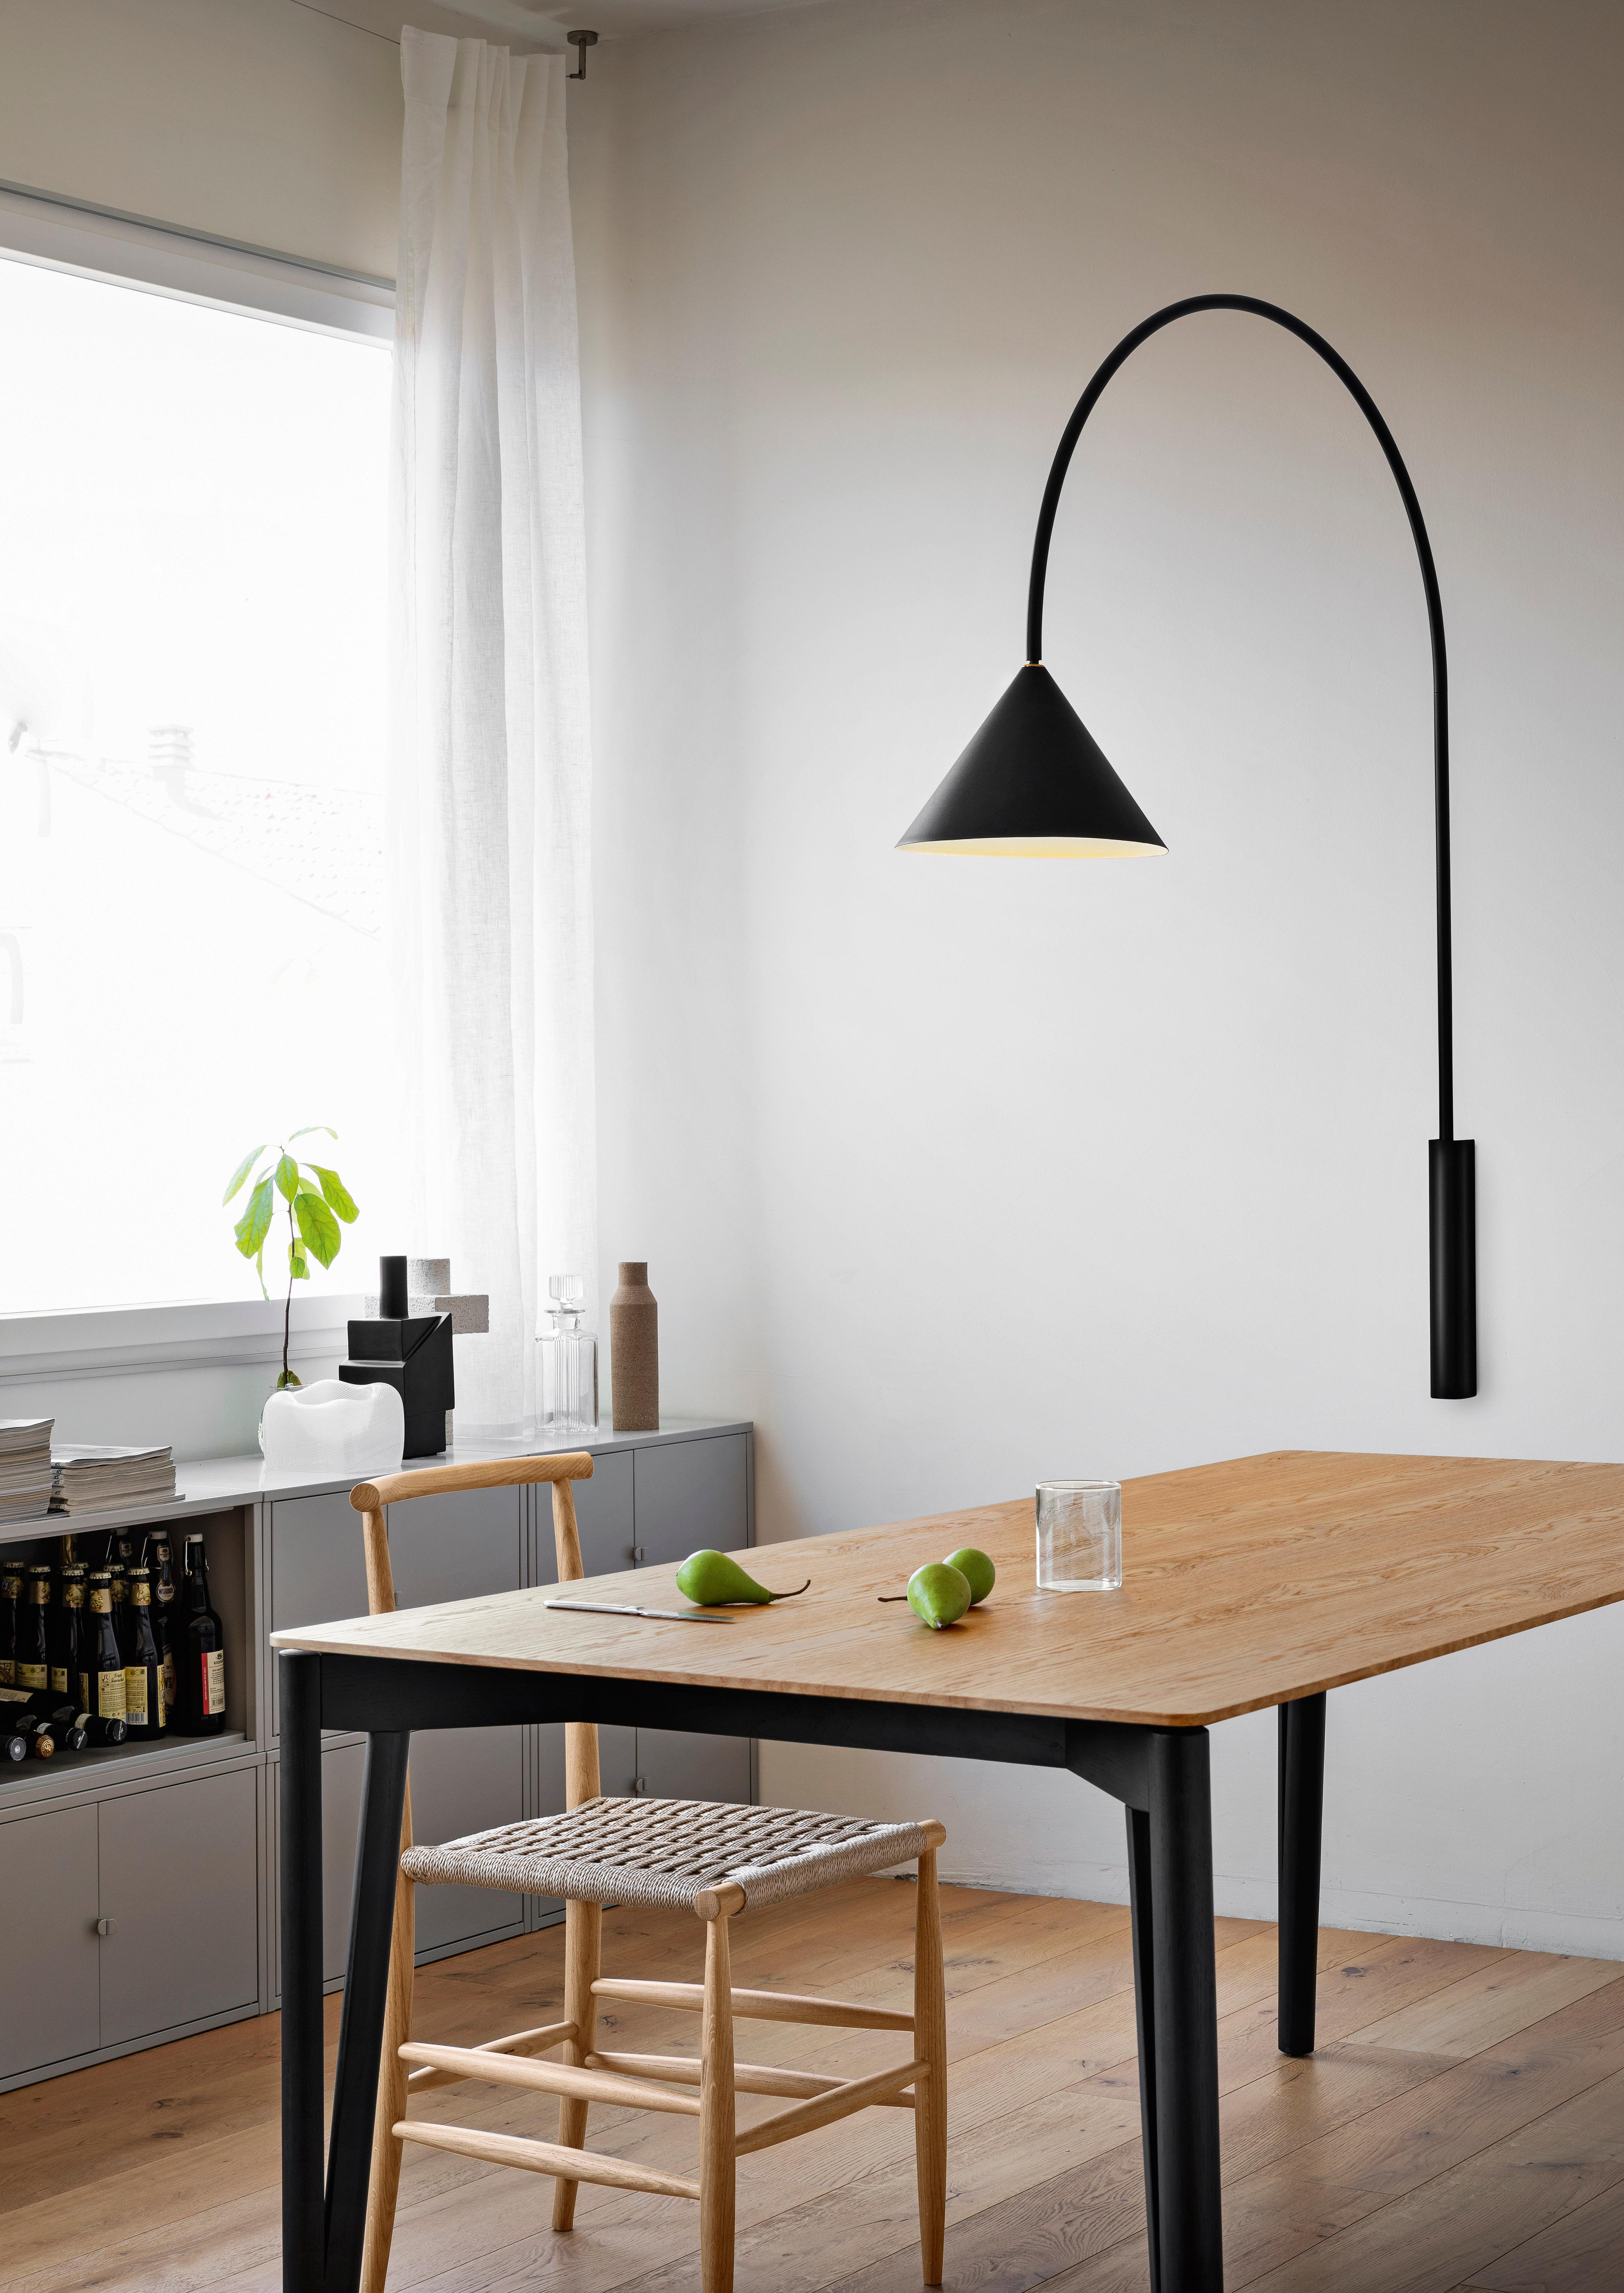 Ozz is also a winner at the dining table, where it becomes a wall lamp with a shorter arc that would look equally at home in the most elegant study.

Wall lamp in black metal with adjustable arch and shade.

Born in 1980 in Verona. Graduated in